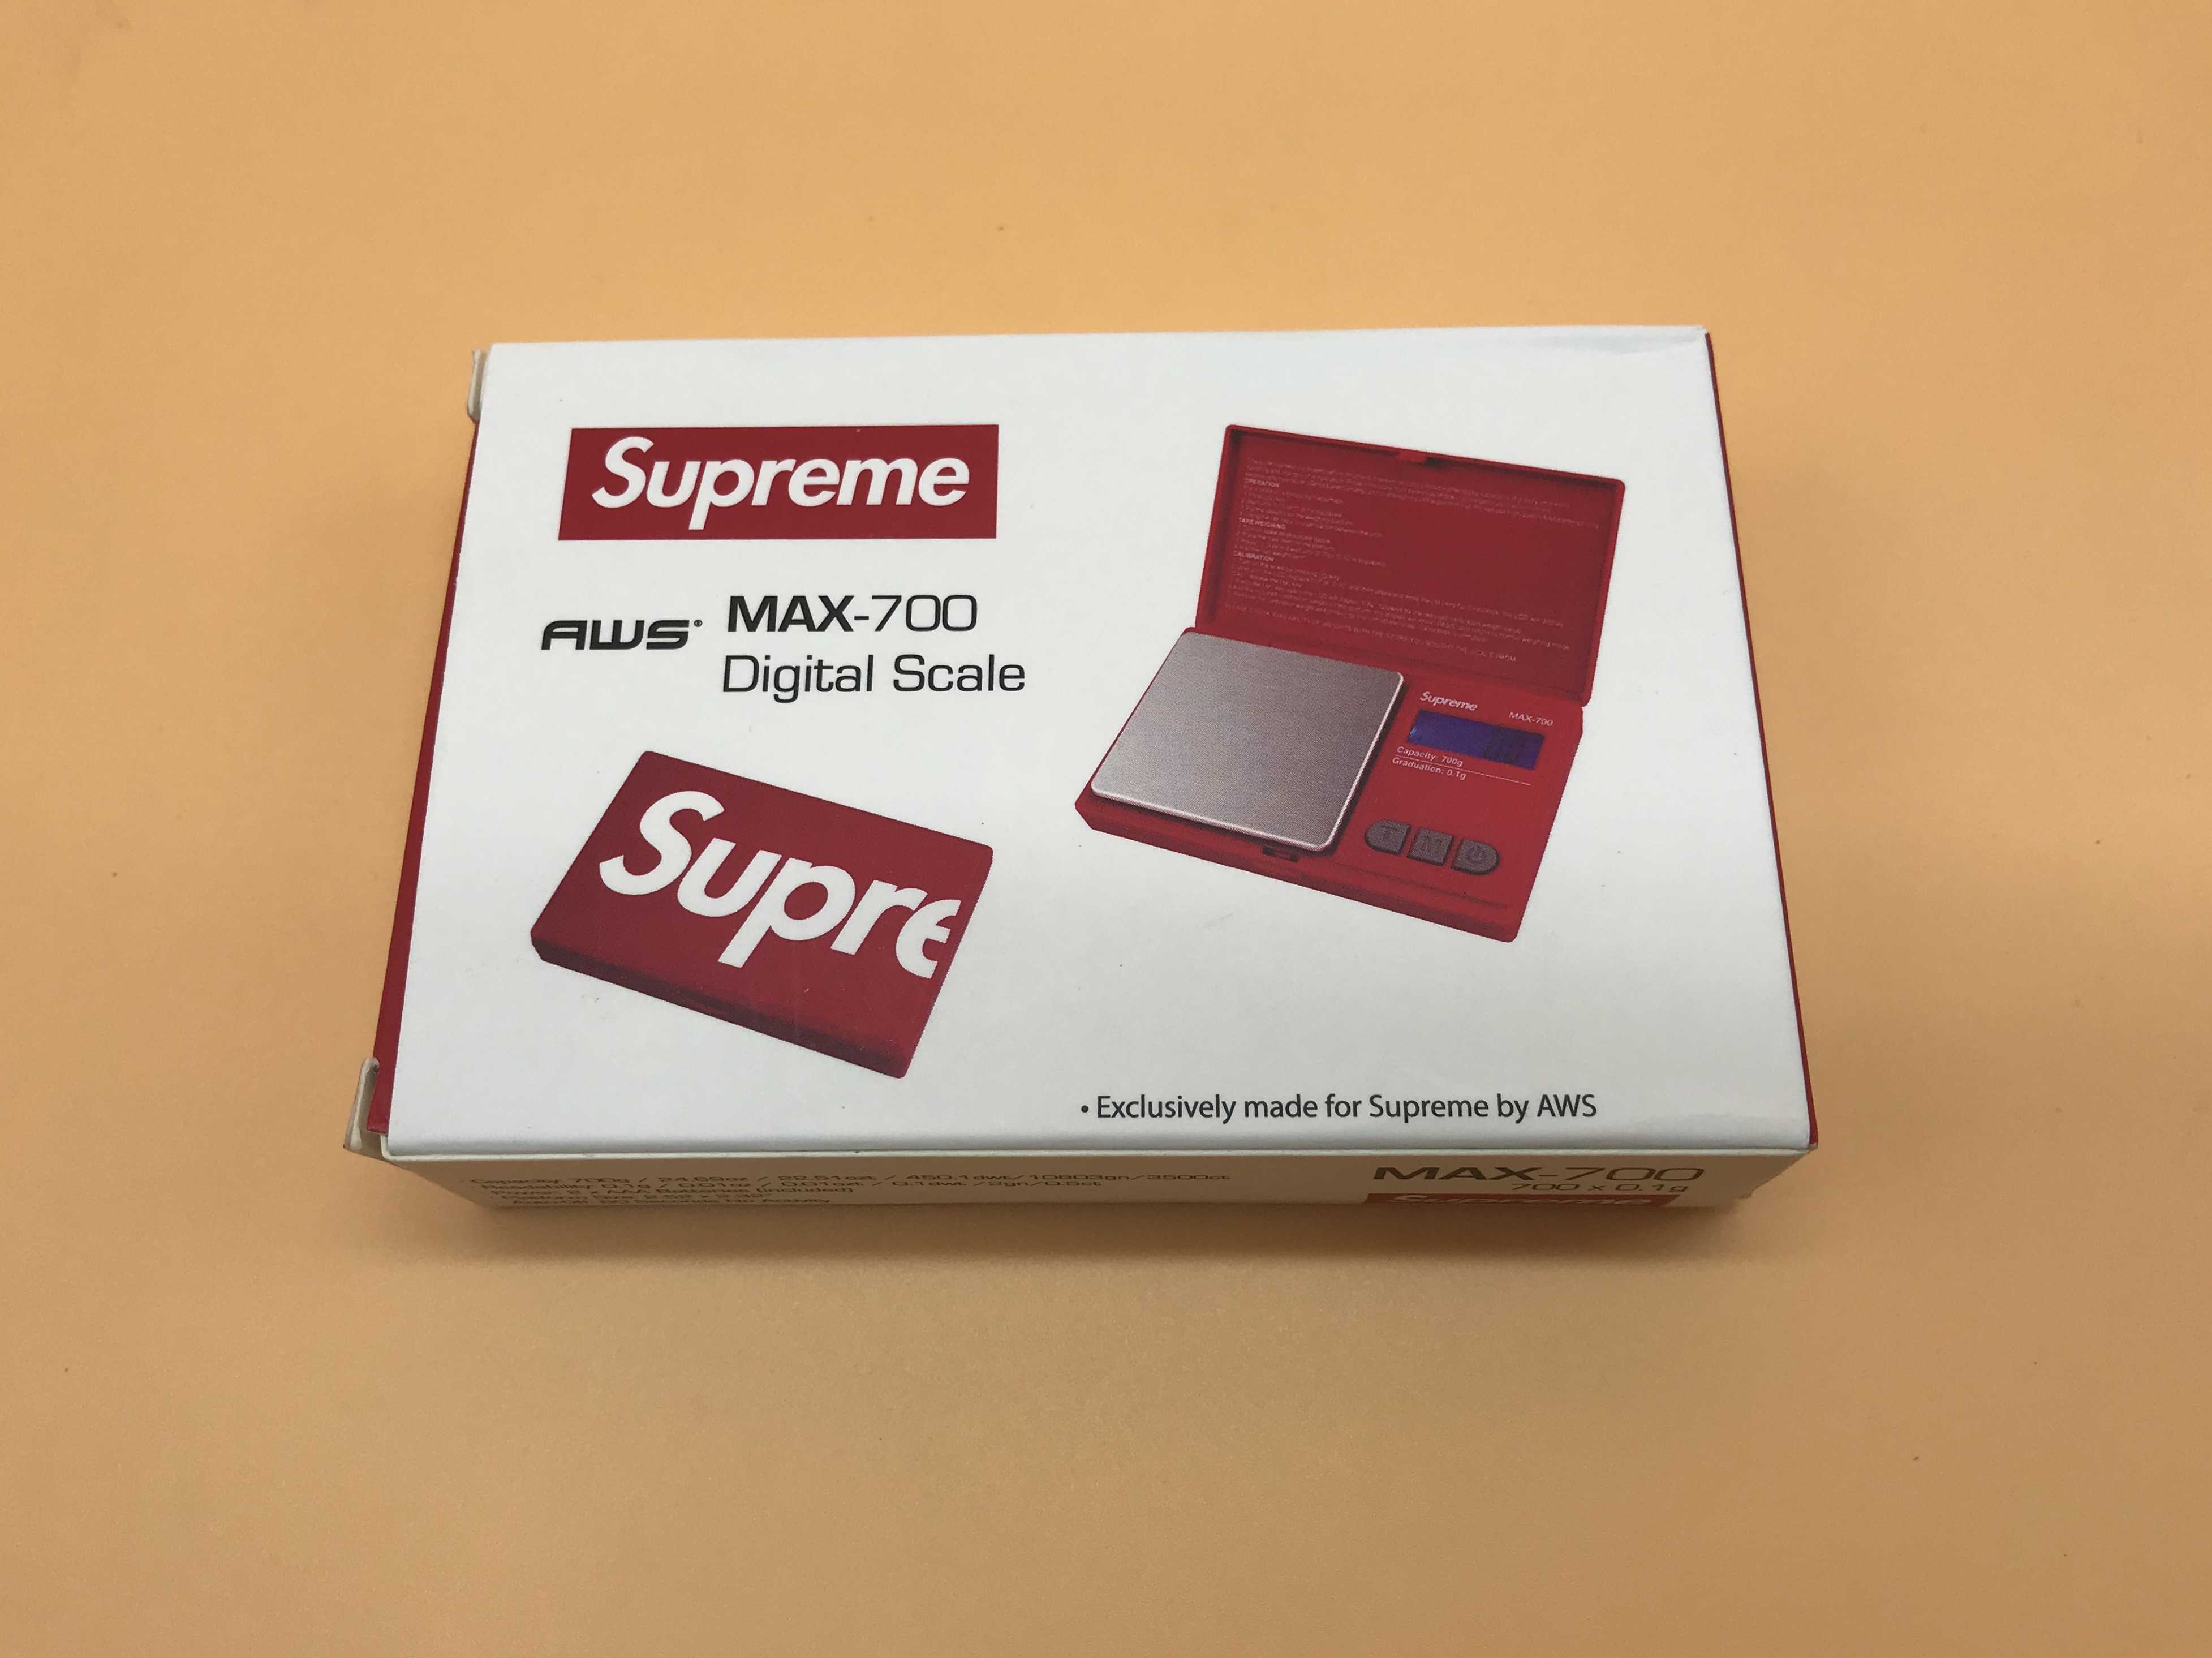 Supreme / AWS Max-700 Digital Scale Brand New | Pawnit 4 Now